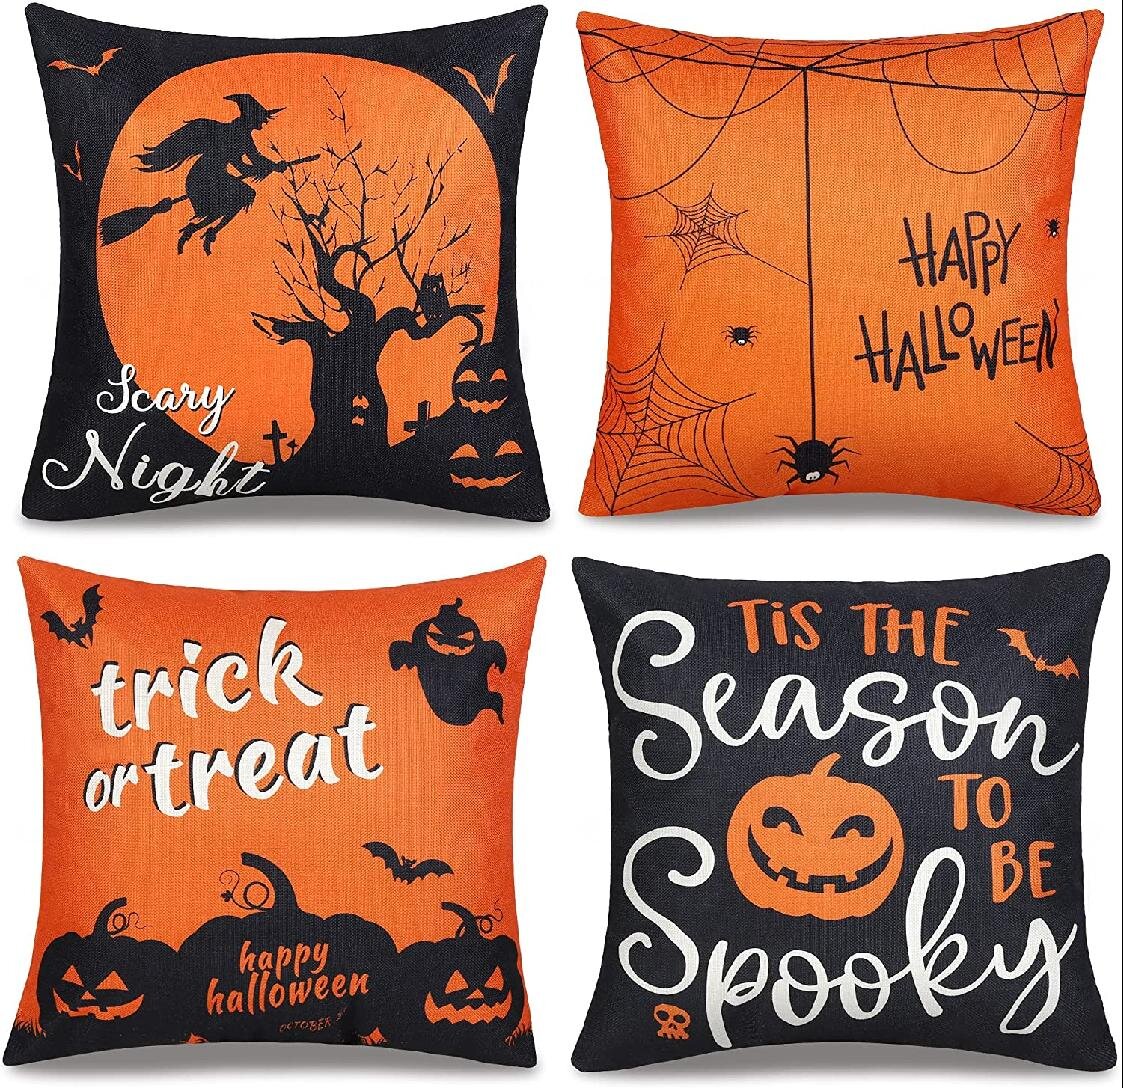 Halloween Pillow Covers 18x18 Happy Halloween Throw Pillow Case Set of 4 Trick or Treat Black and White Decorative Pillow Cover Holiday Decor for Outdoor Livingroom Sofa 